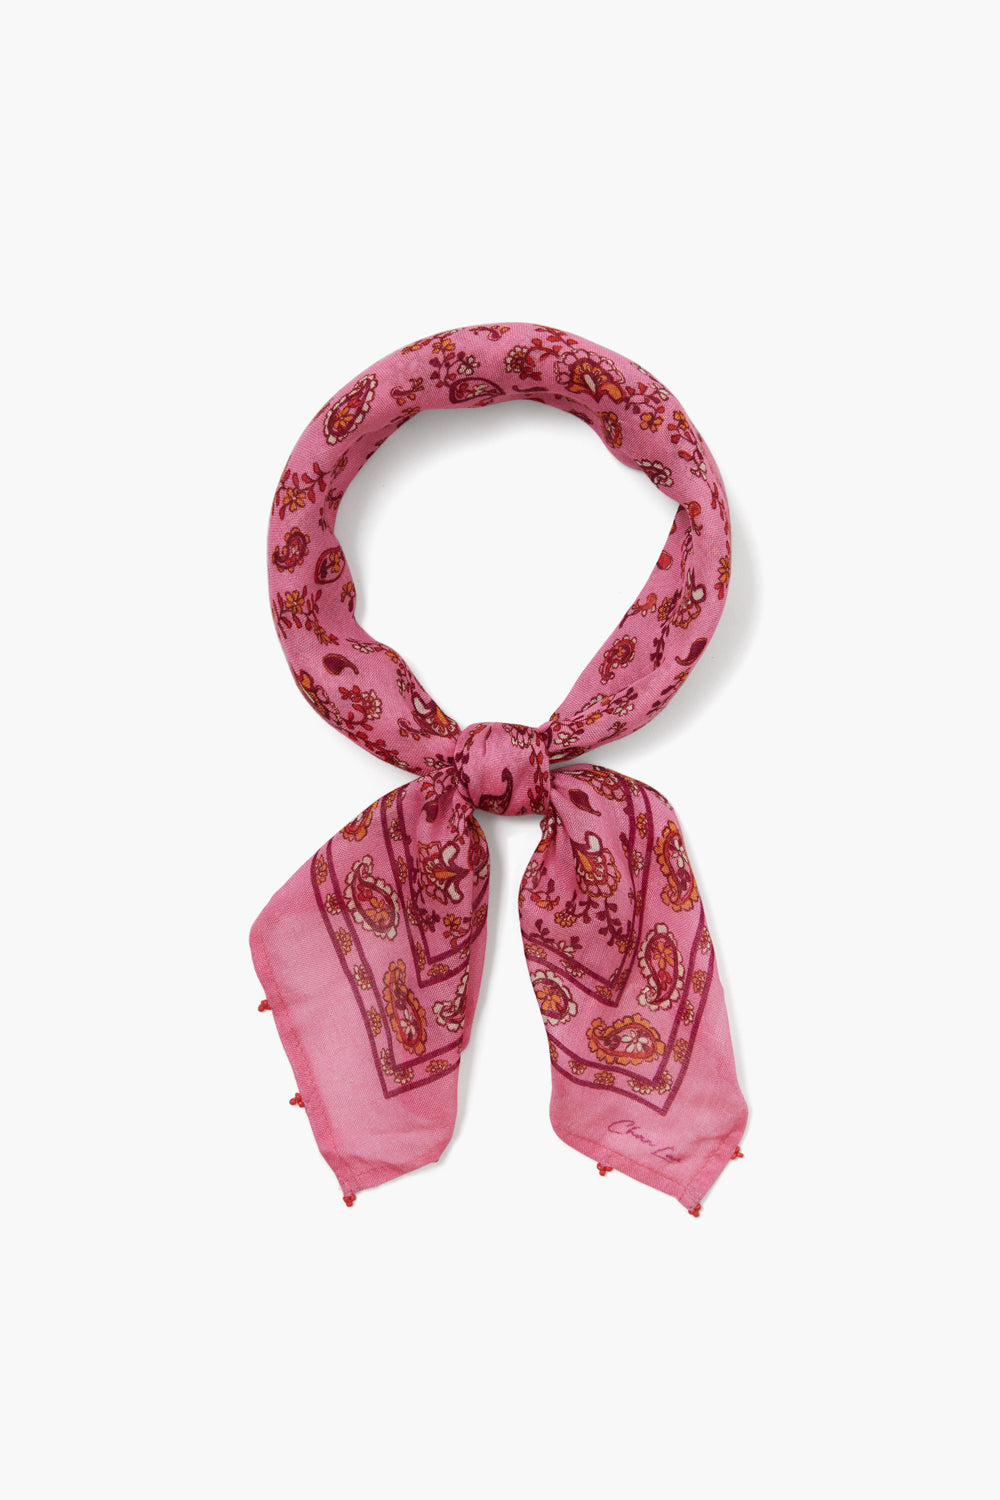 PAISLEY BANDANA WITH SEED BEAD EDGES - FUCHSIA PINK - Kingfisher Road - Online Boutique